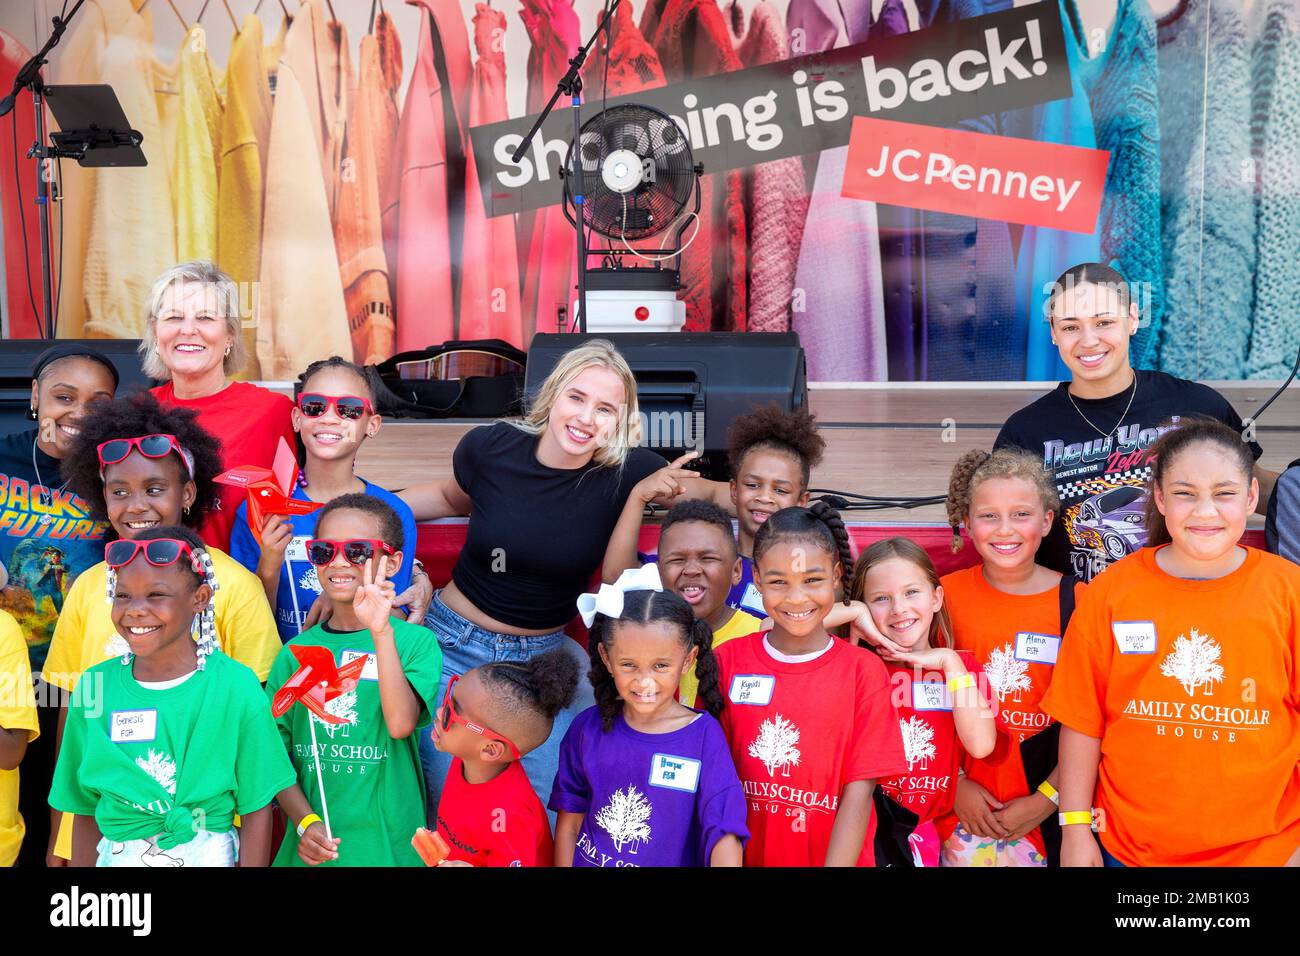 IMAGE DISTRIBUTED FOR JCPENNEY - University of Louisville Basketball team's  Hailey Van Lith, Mykasa Robinson and Chrislyn Carr along with Cathe Dykstra  and kids from Family Scholar House celebrate JCPenney's 120th birthday